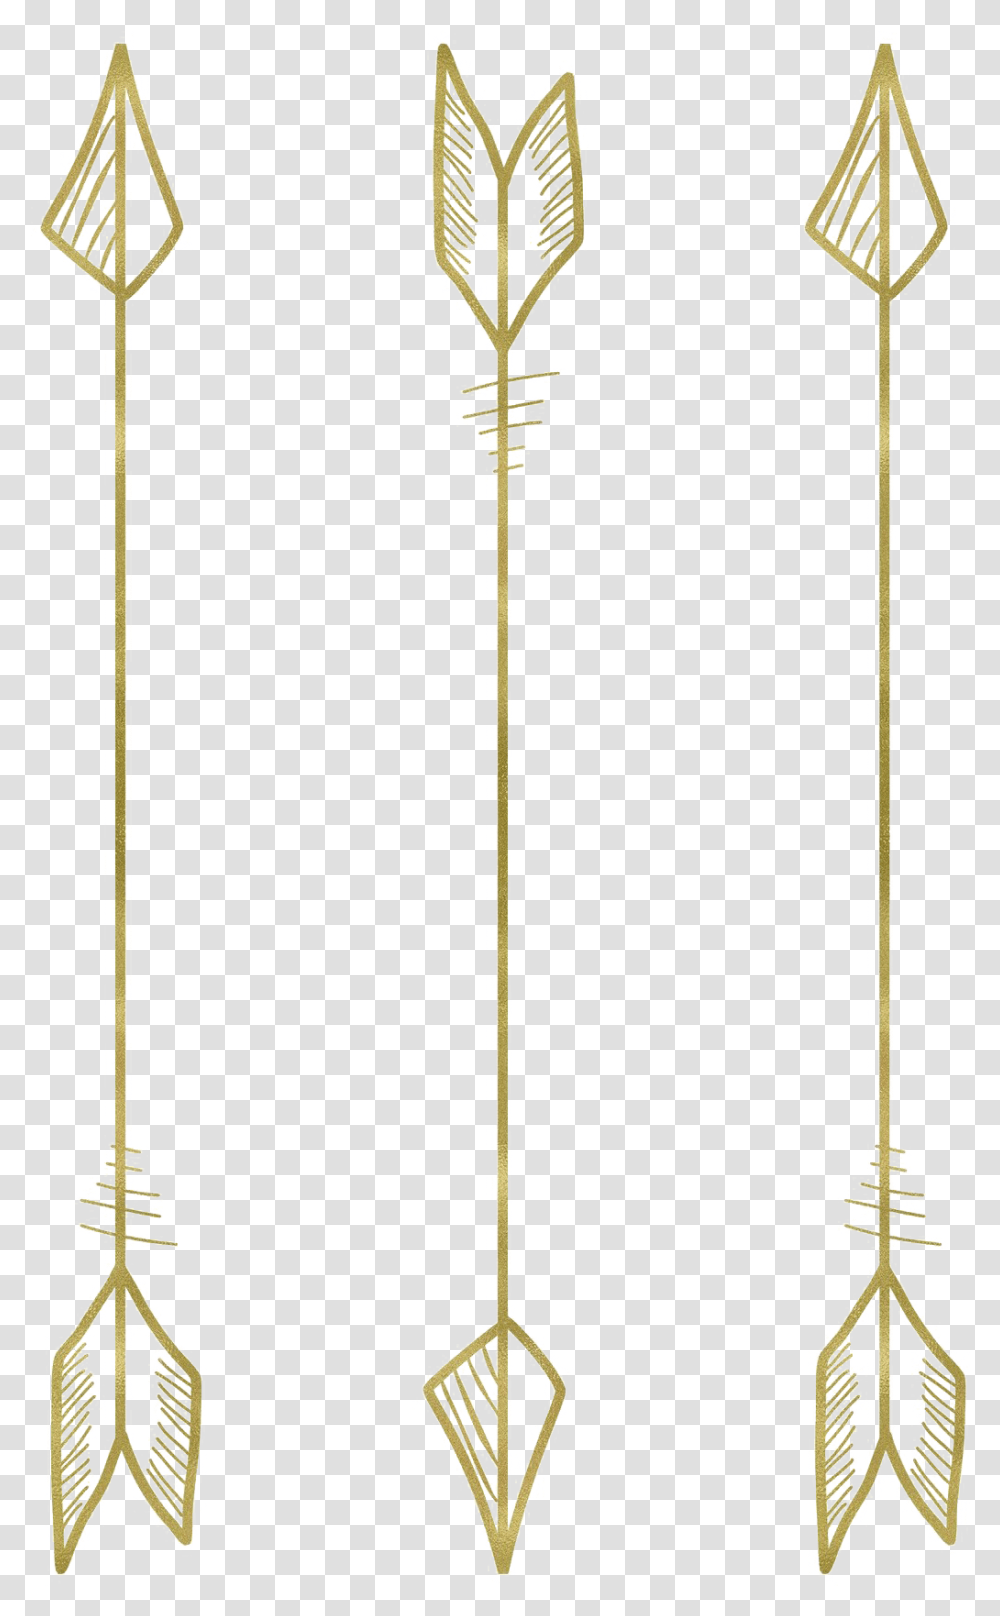 Tribal Arrow Earrings, Utility Pole, Weapon, Weaponry Transparent Png